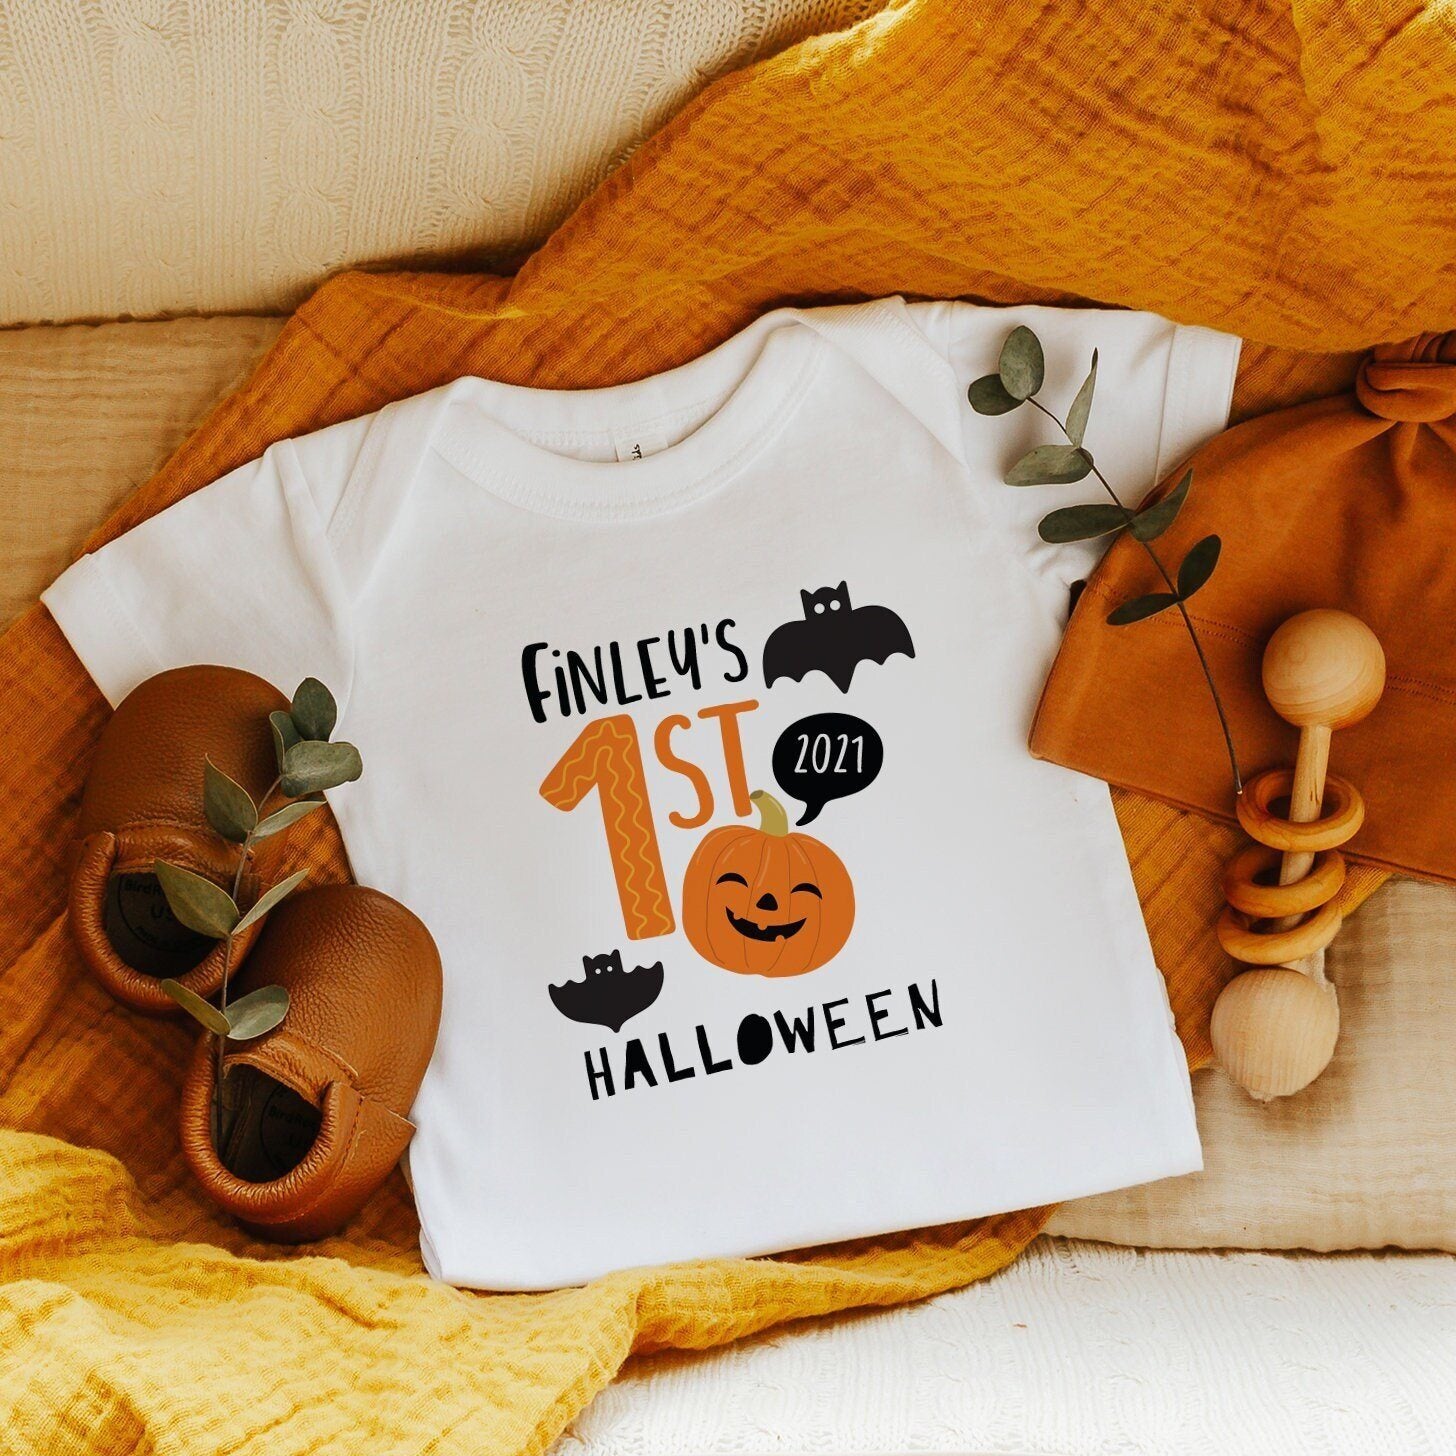 Personalised kids first Halloween T-Shirt with name, Boy or girl 1st Halloween shirt, Pumpkin costume